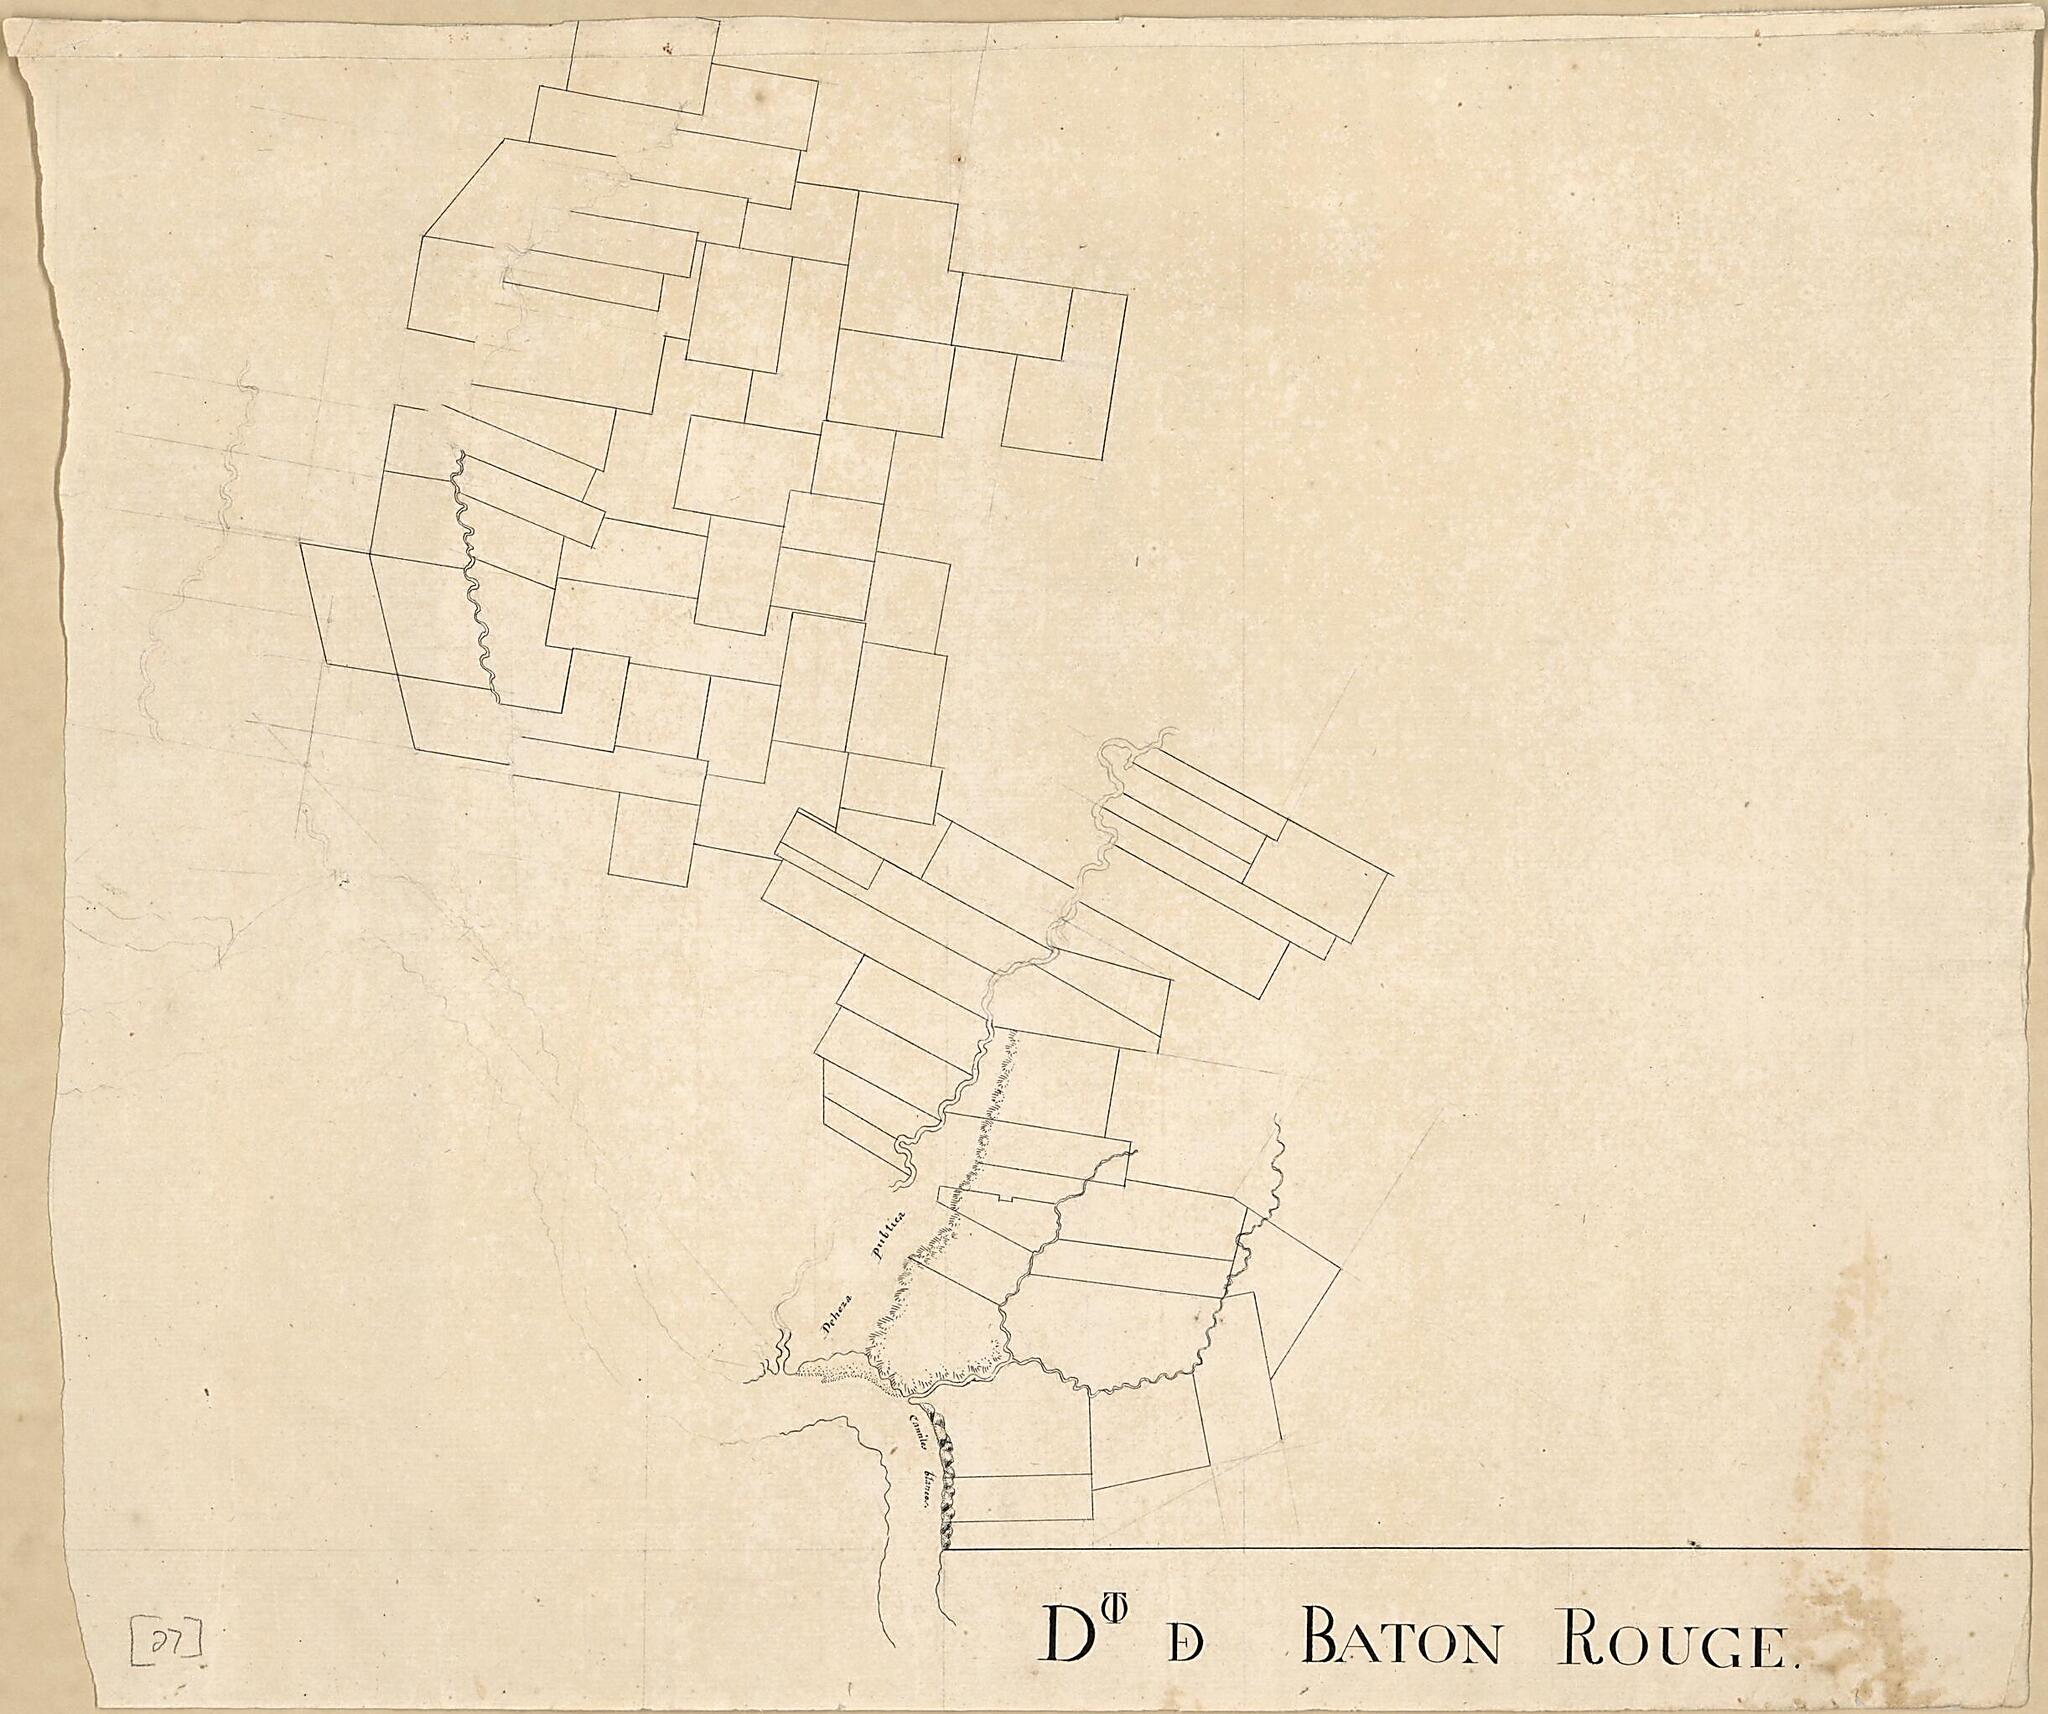 This old map of Dto De Baton Rouge from 1799 was created by Vicente Sebastián Pintado in 1799